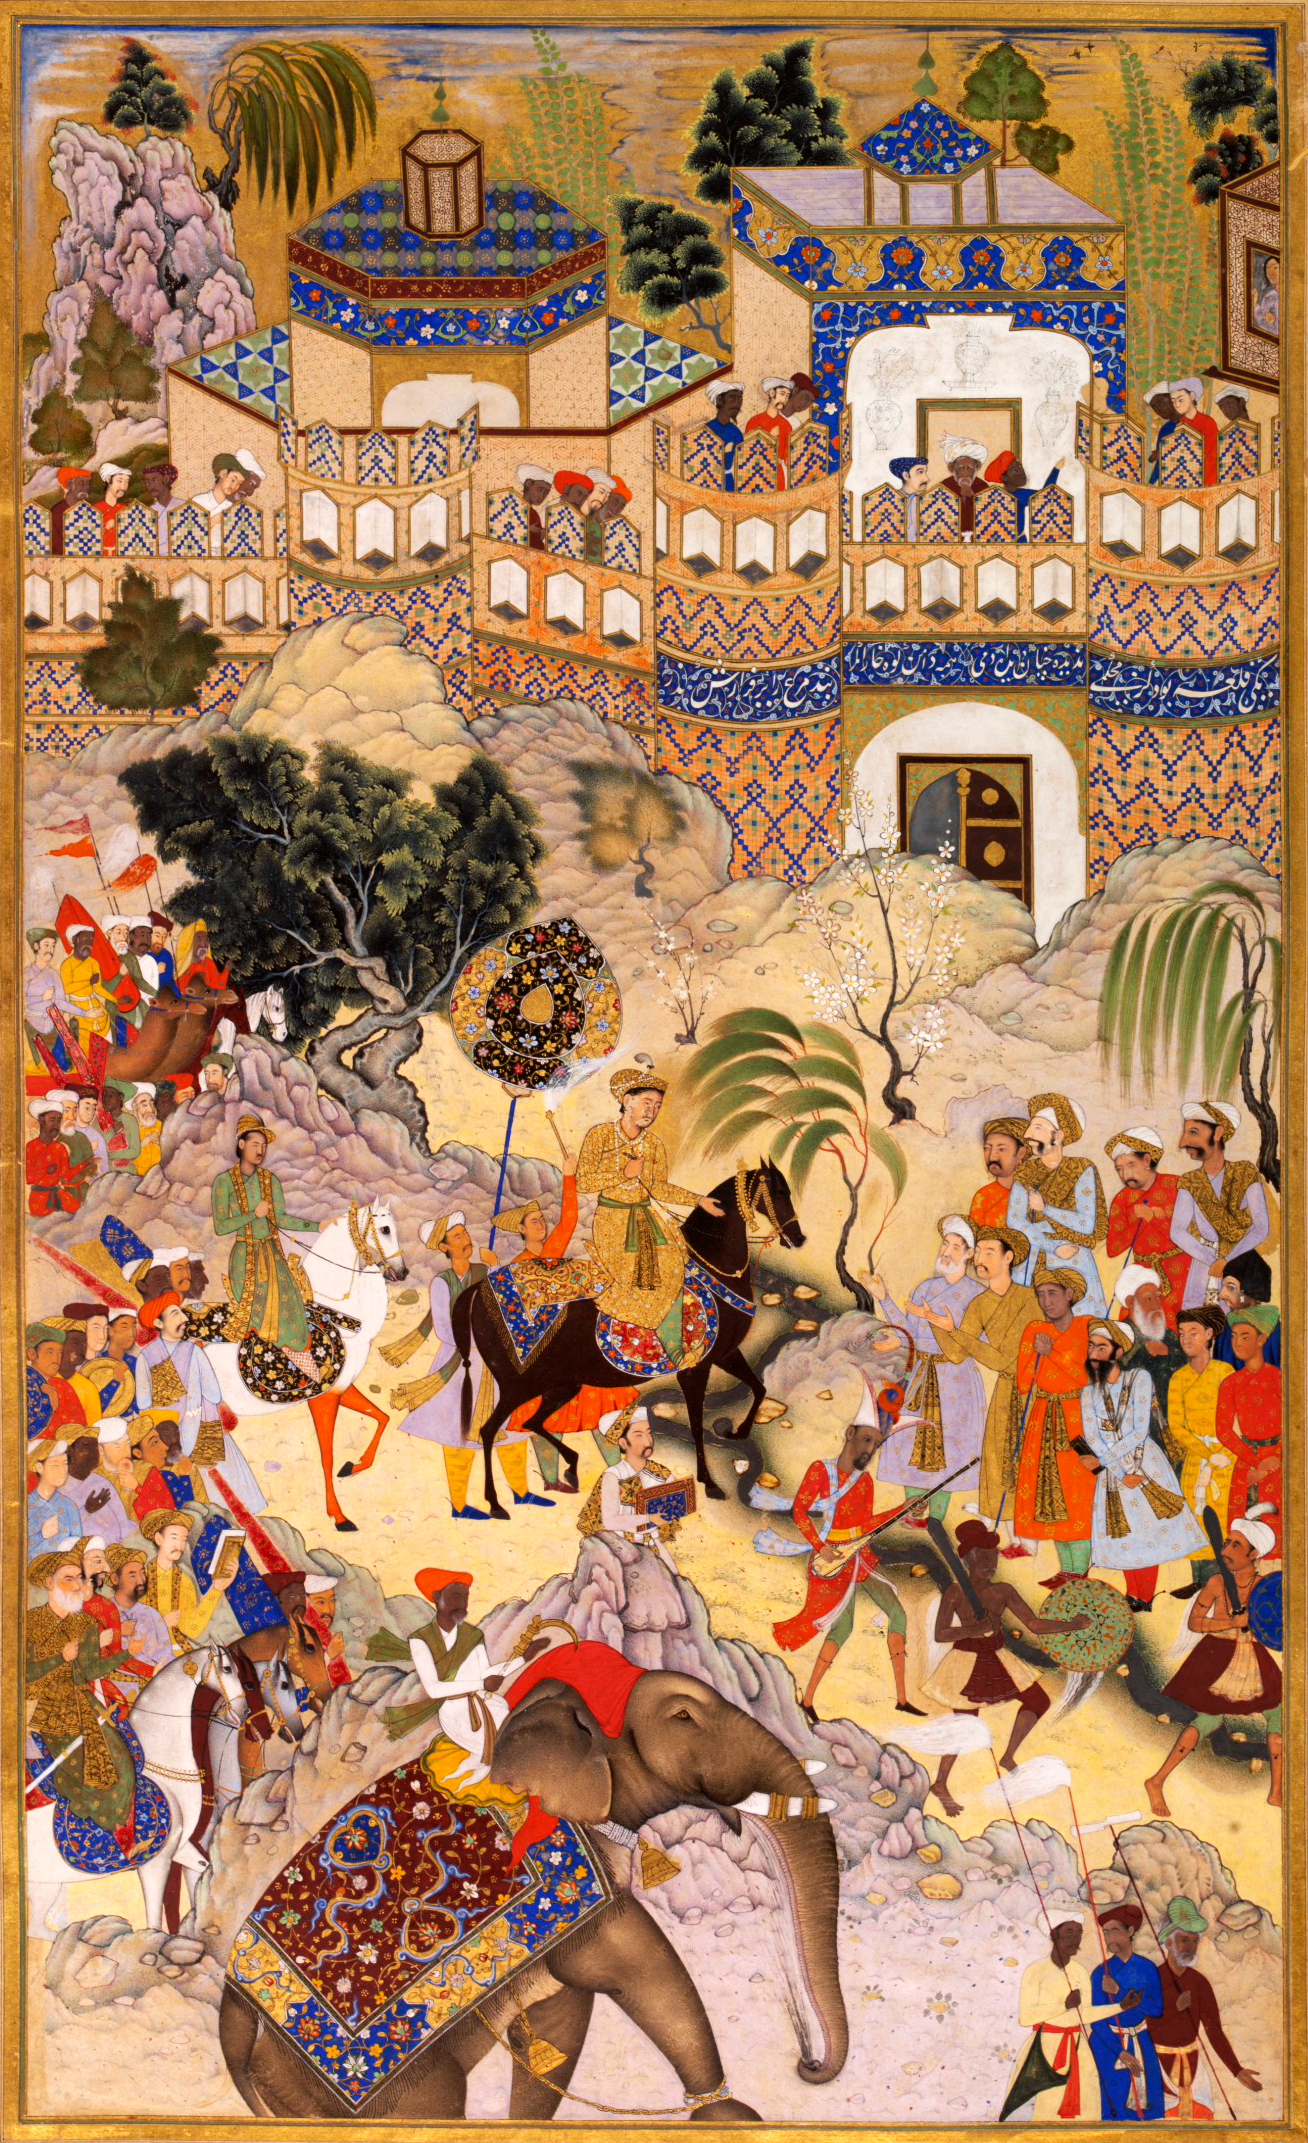 A depiction of Emperor Akbar entering Surat, followed by a procession including a musician, bodyguards, and camels. He observes the Surat fort as he progresses, with an elephant featured prominently in the foreground.